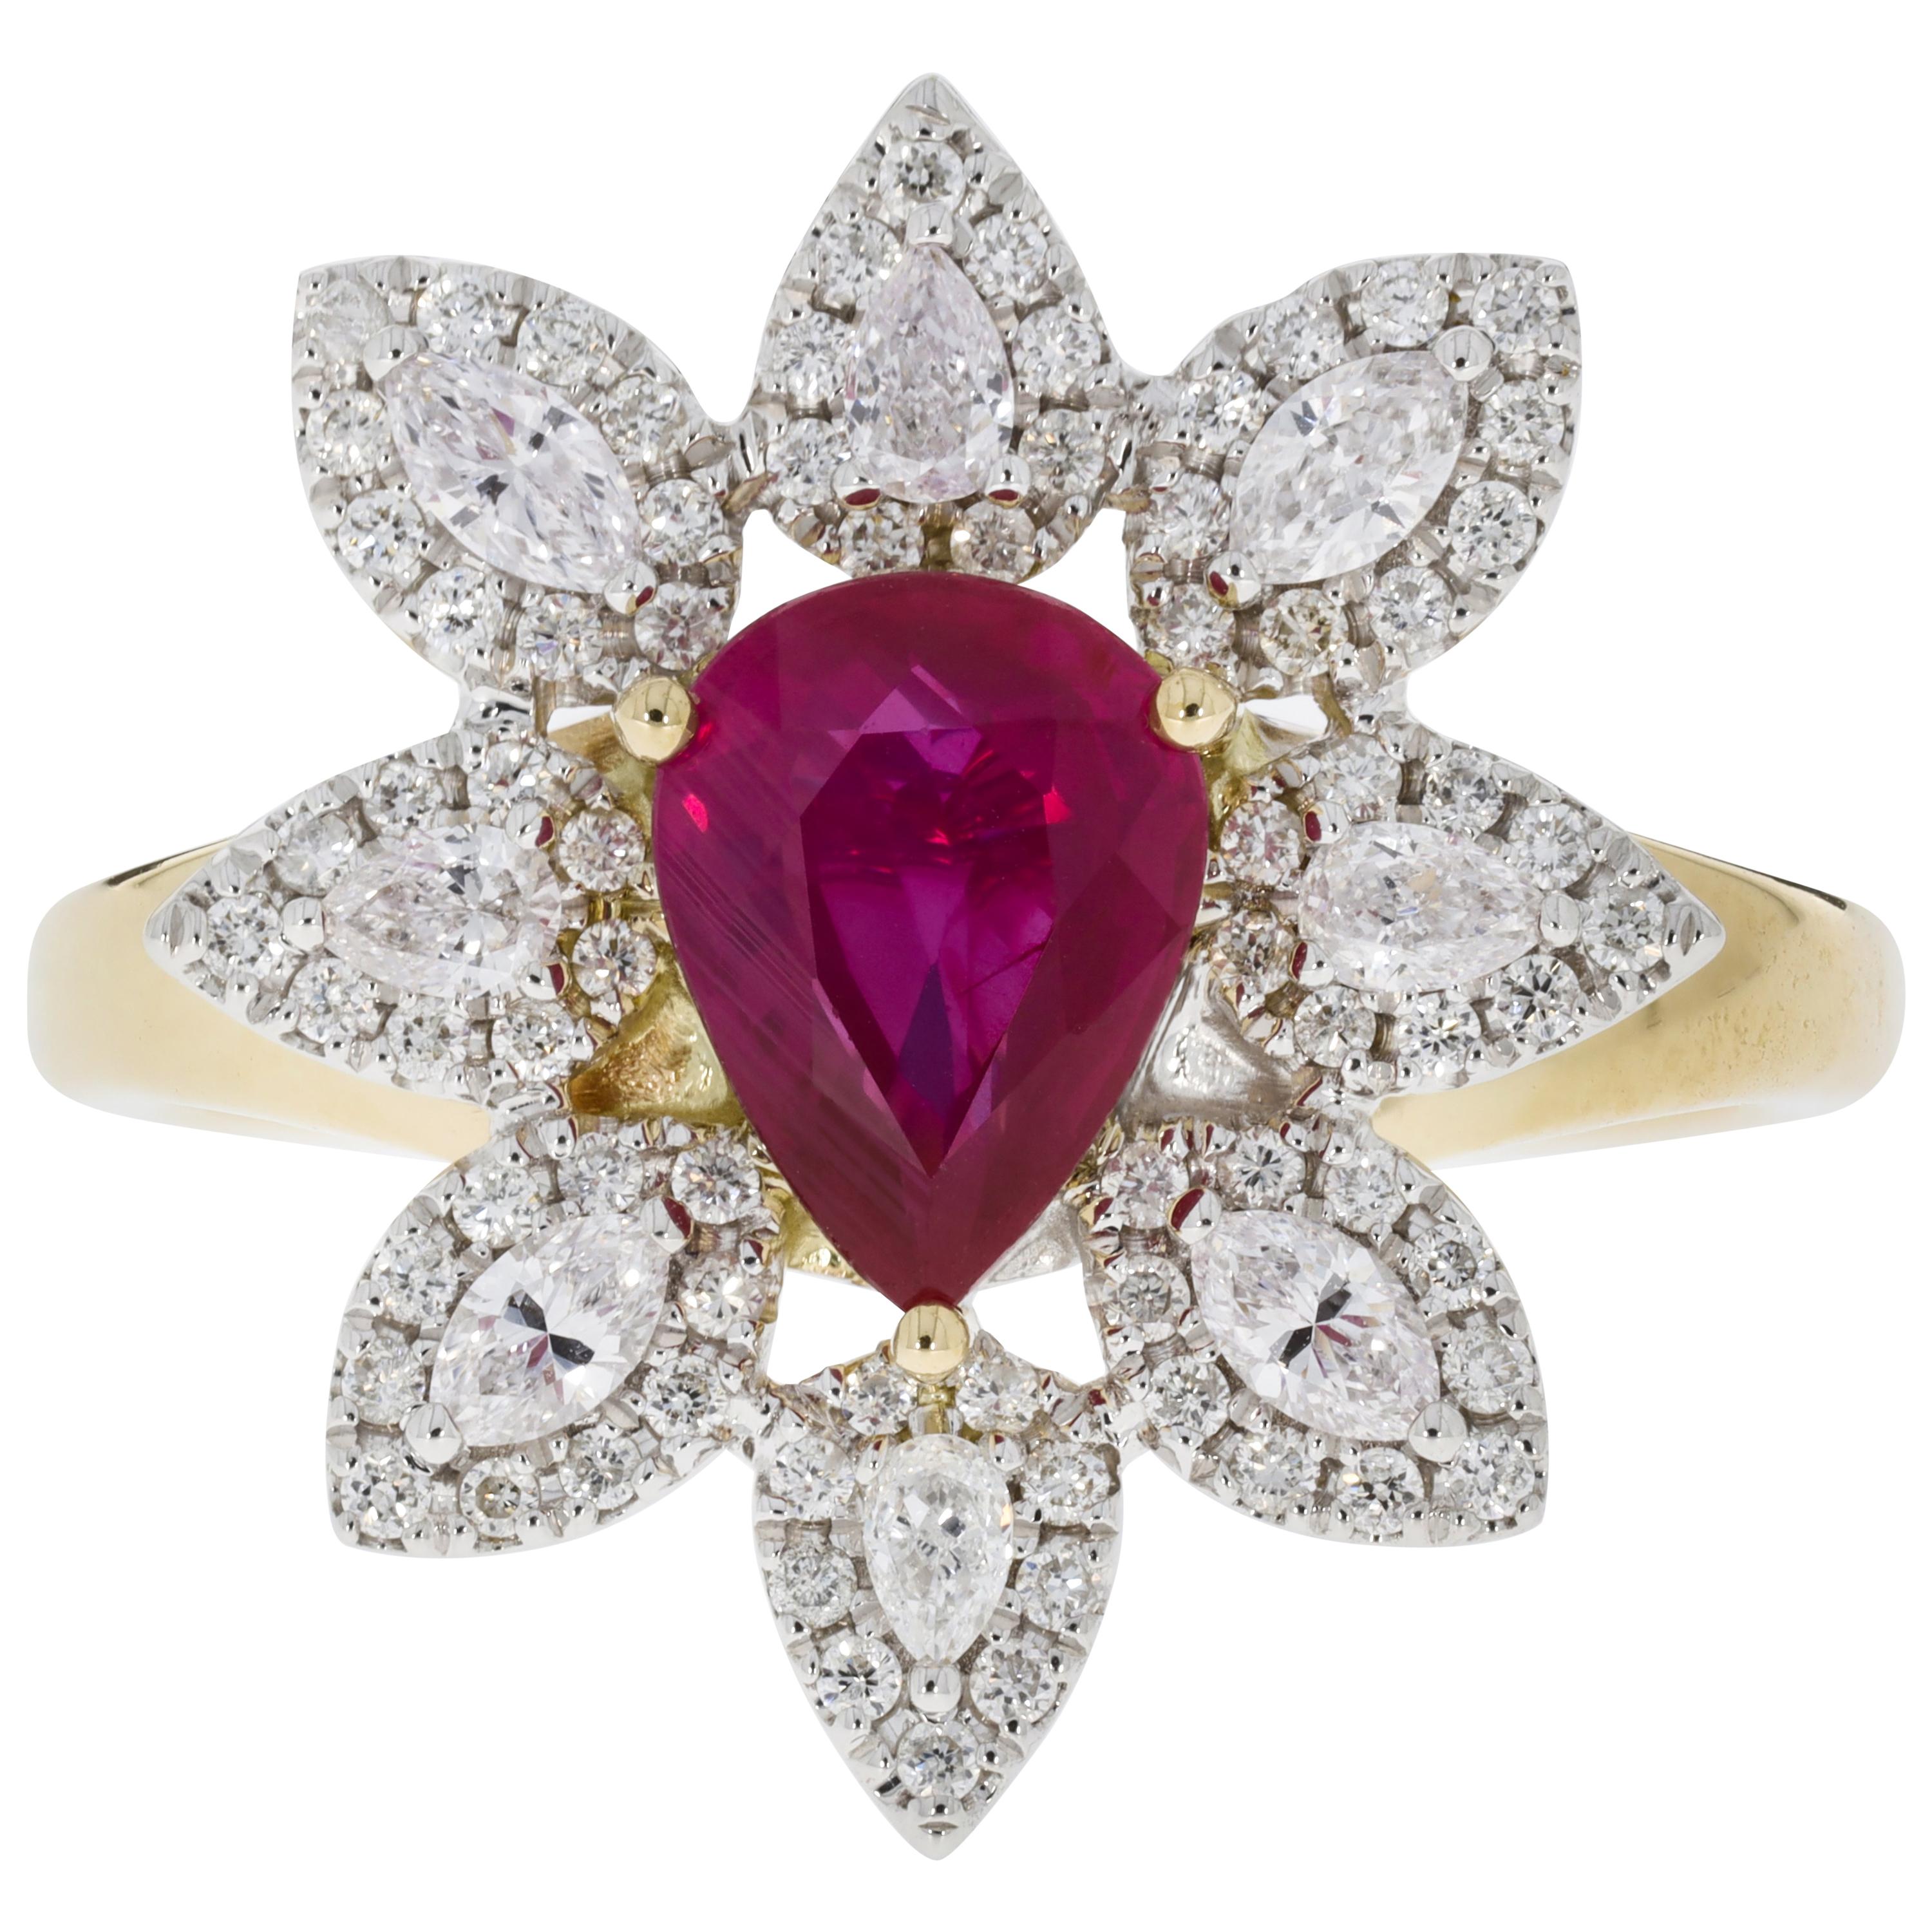 Gem Bleu 1.29 Ct Unheated Ruby in 14k Two Tone Gold with 0.58 Tct Diamond Accent